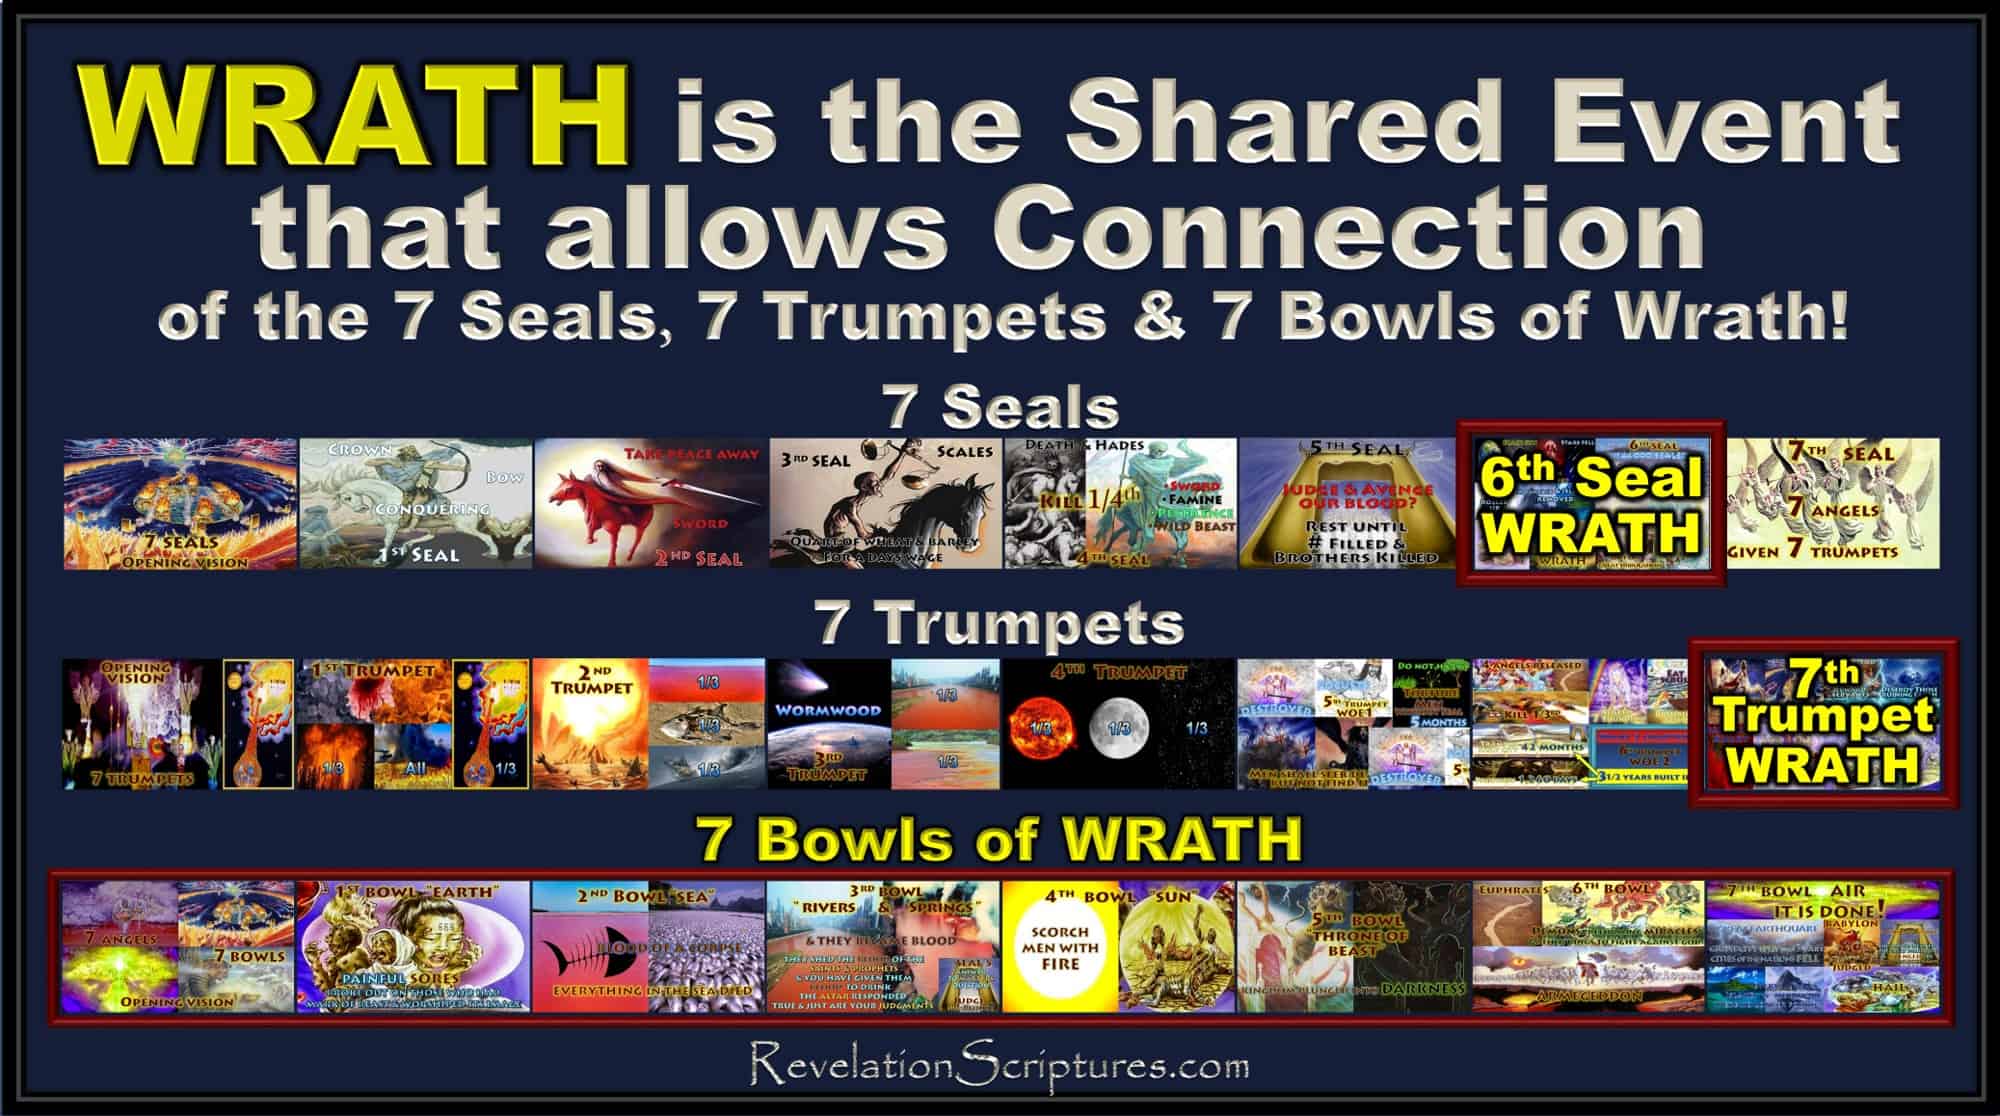 Book of Revelation,the Book of Revelation,7 Seals,7 Trumpets,7 Bowls of Wrath, how to connect,connecting 7 Seals to 7 Trumpets,Connecting 7 Seals to 7 Bowls of Wrath,Connecting 7 Seals to 7 Trumpets to 7 Bowls of Wrath,How to connect the timelines of Revelation,connecting the timelines of Revelation,connecting the events of Revelation